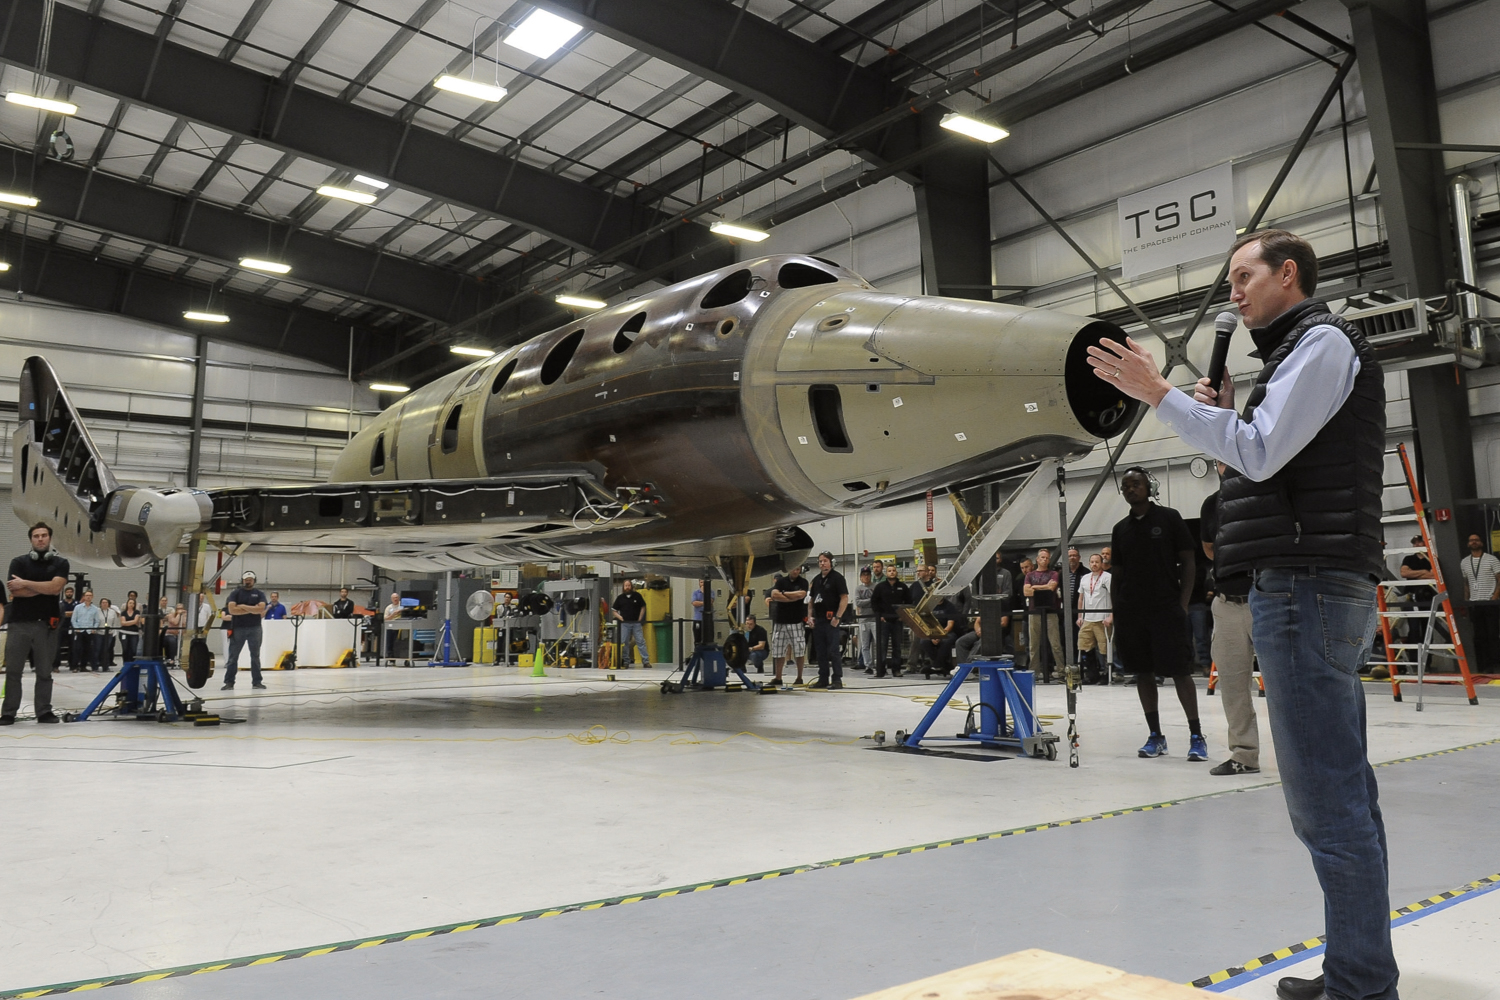 Virgin Galactic's CEO, George Whitesides, in front of the second SpaceShipTwo as he congratulates the team in Mojave after completing another important milestone in the process of assembling and integrating the second SpaceShipTwo - Weight on Wheels. Photo Credit: Virgin Galactic